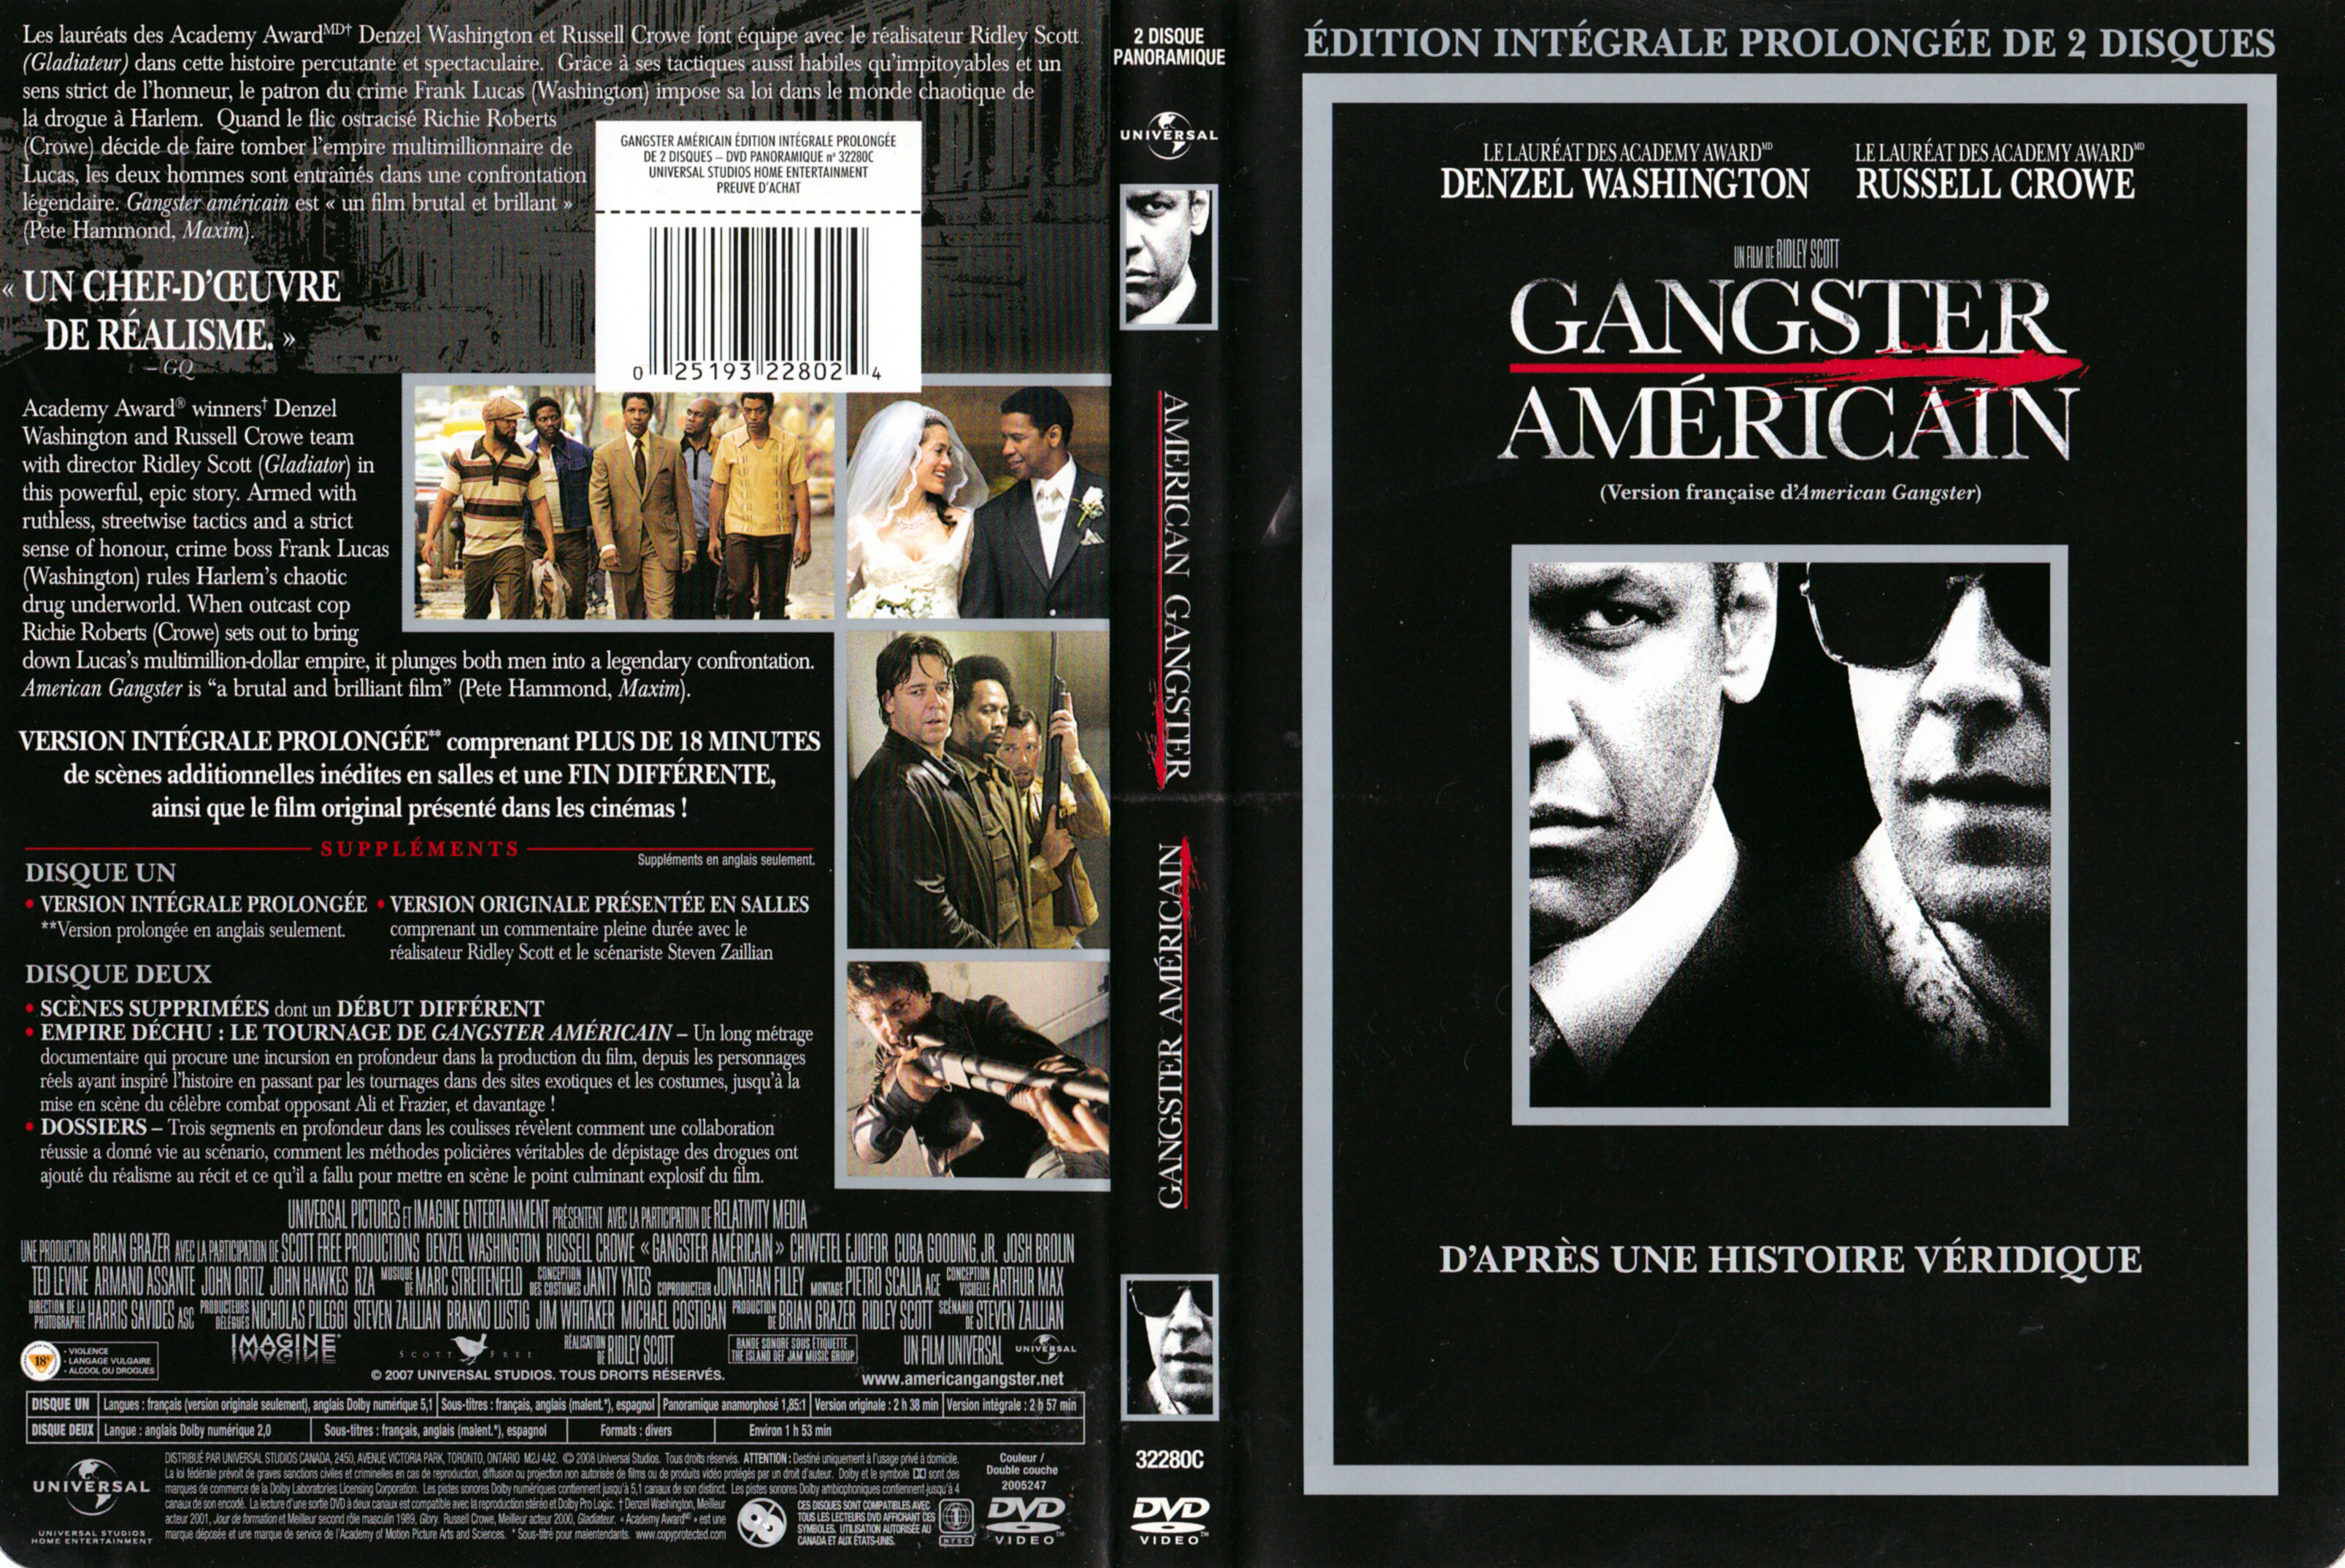 Jaquette DVD Gangster amricain (Canadienne)